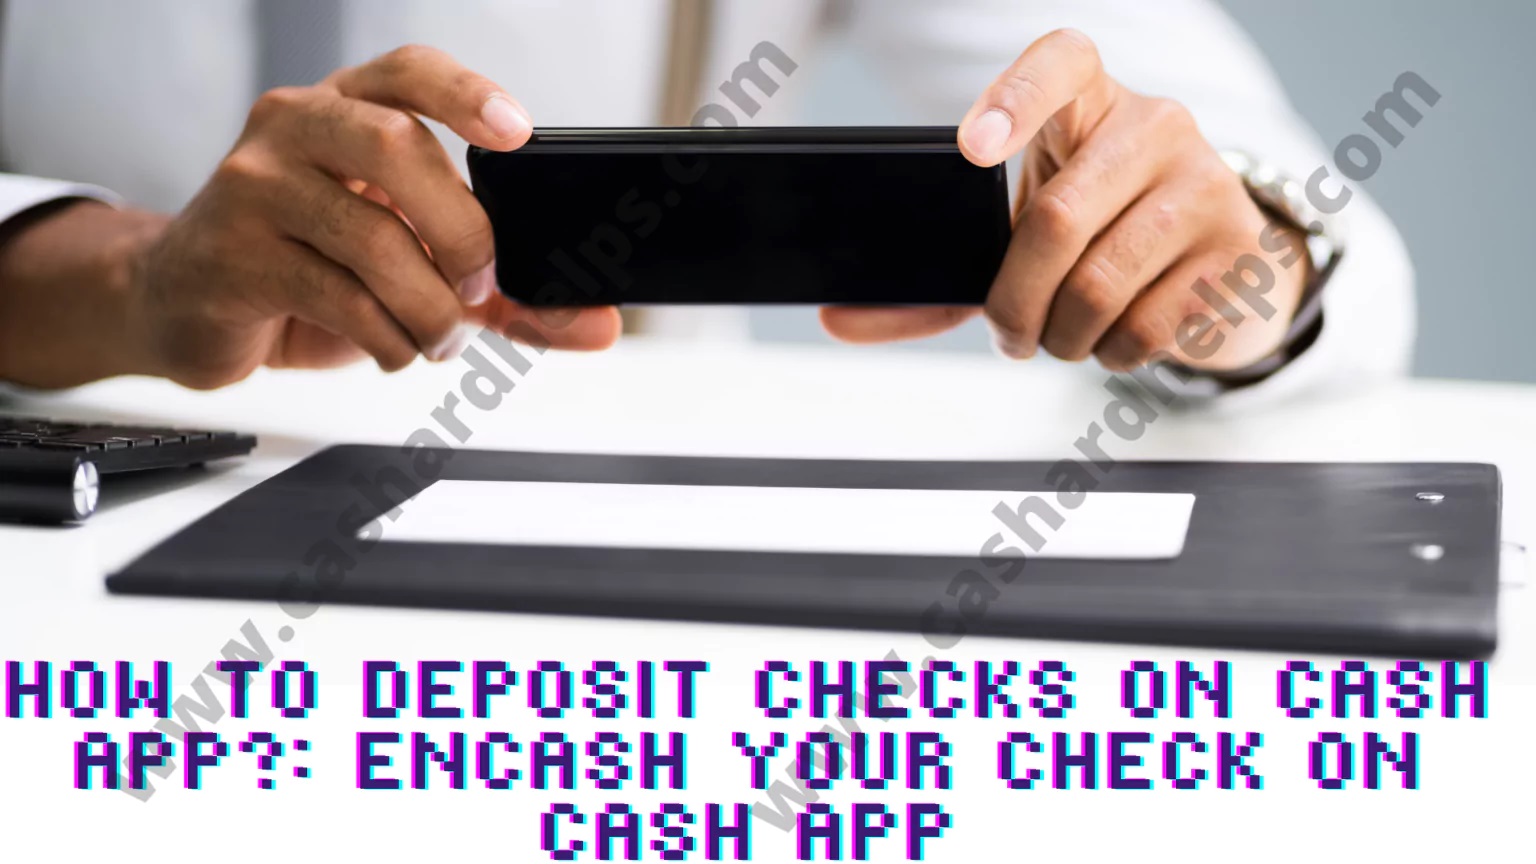 how-to-deposit-a-check-on-cash-app.jpg